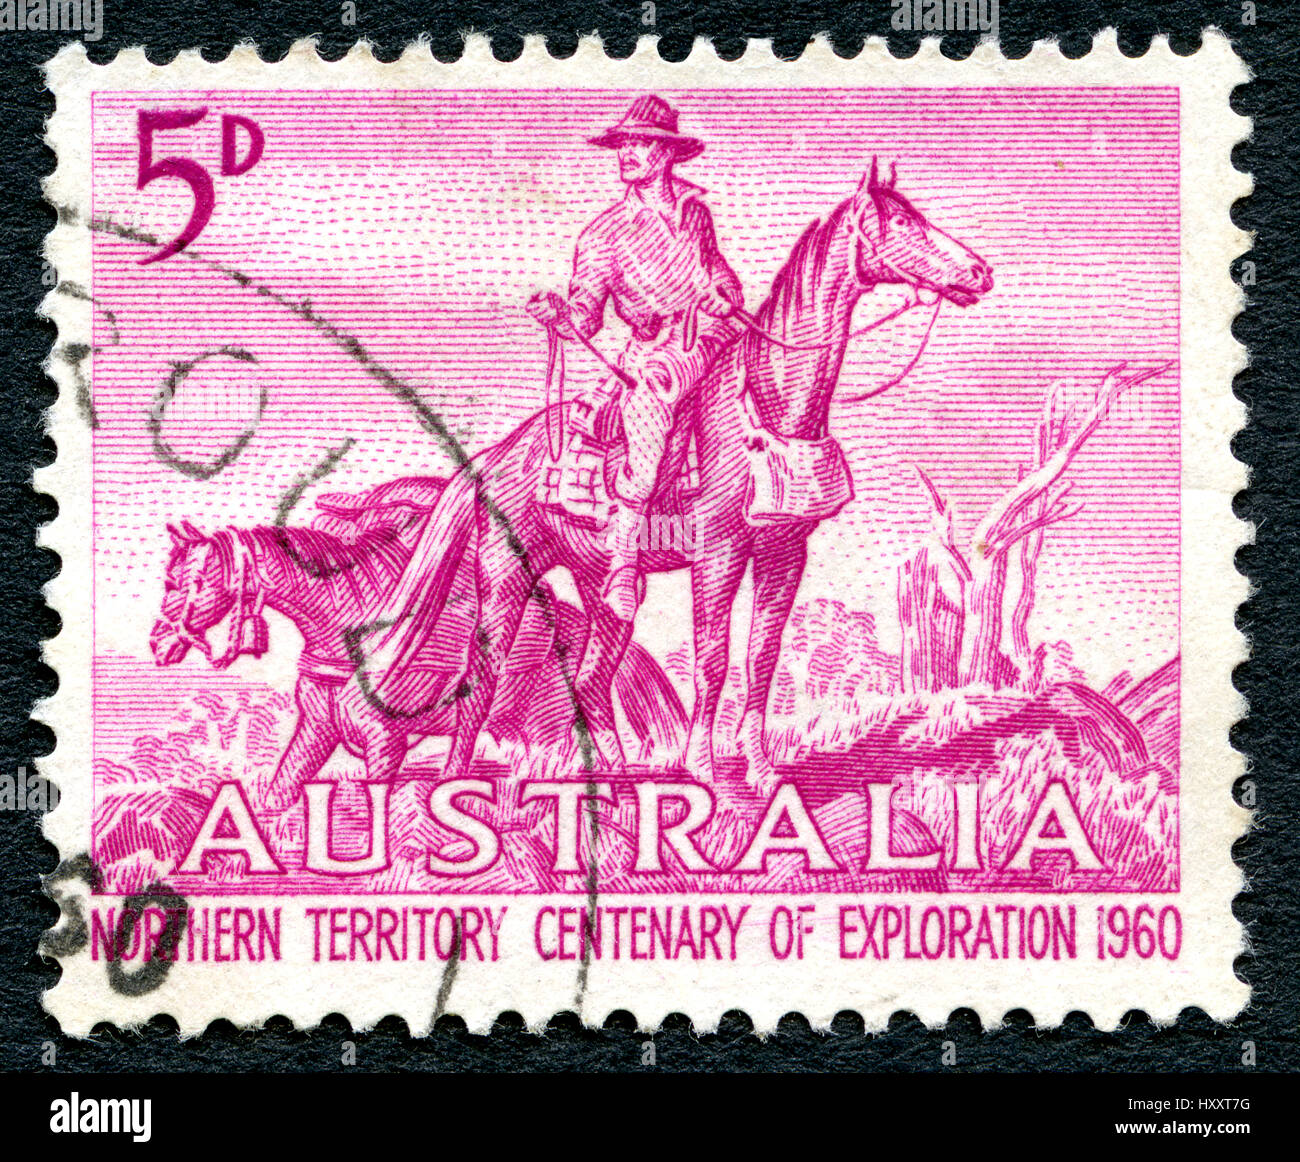 AUSTRALIA - CIRCA 1960: A used postage stamp from Australia, depicting an illustration of an Overlander and celebrating 100 years of Northern Territor Stock Photo